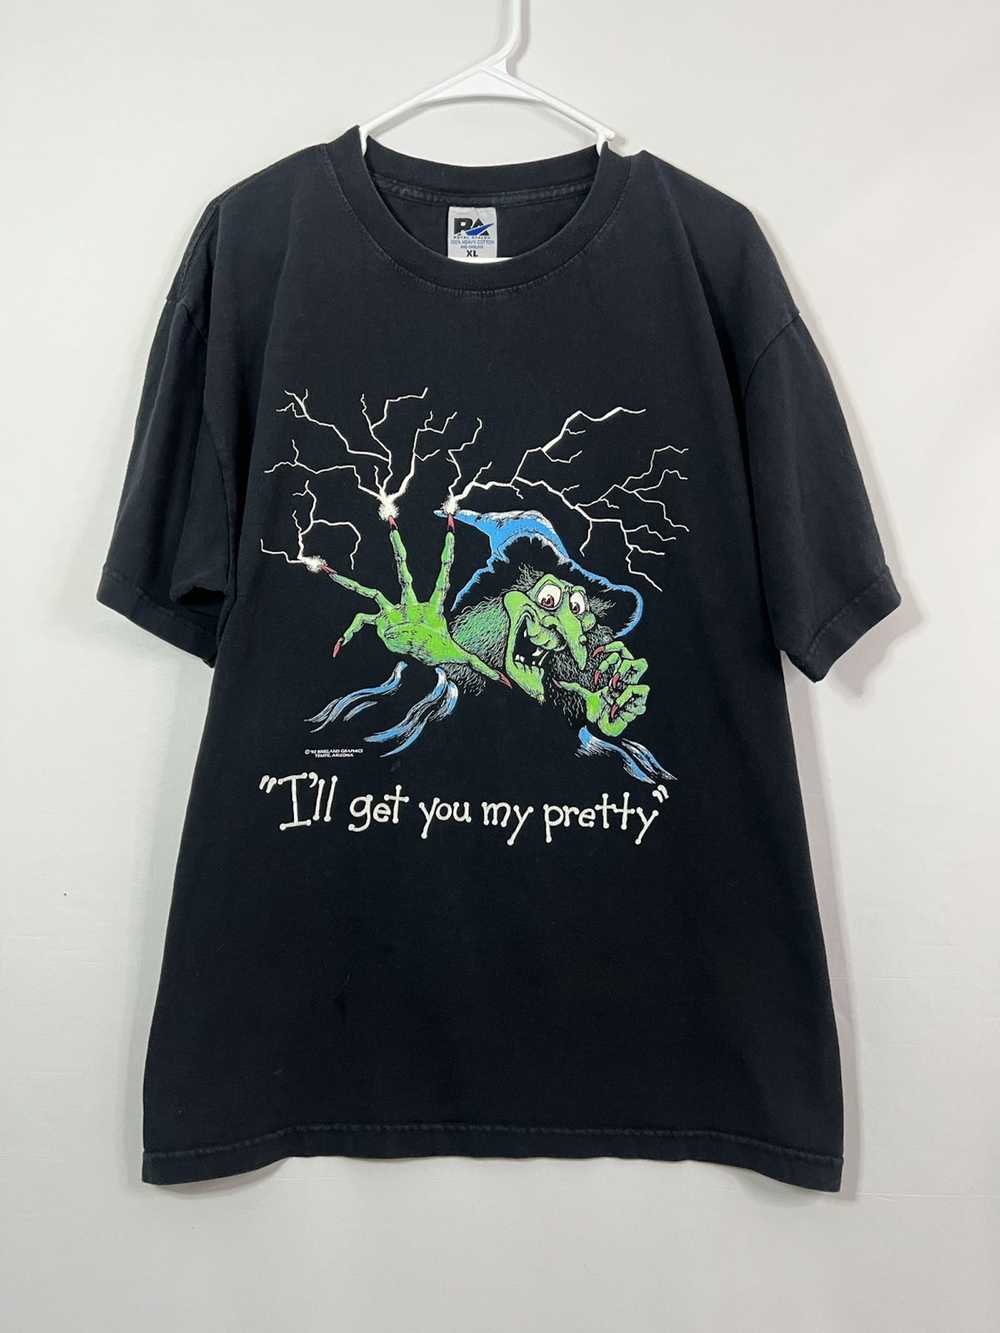 Vintage 1992 I’ll GET YOU MY PRETTY TEE - image 1